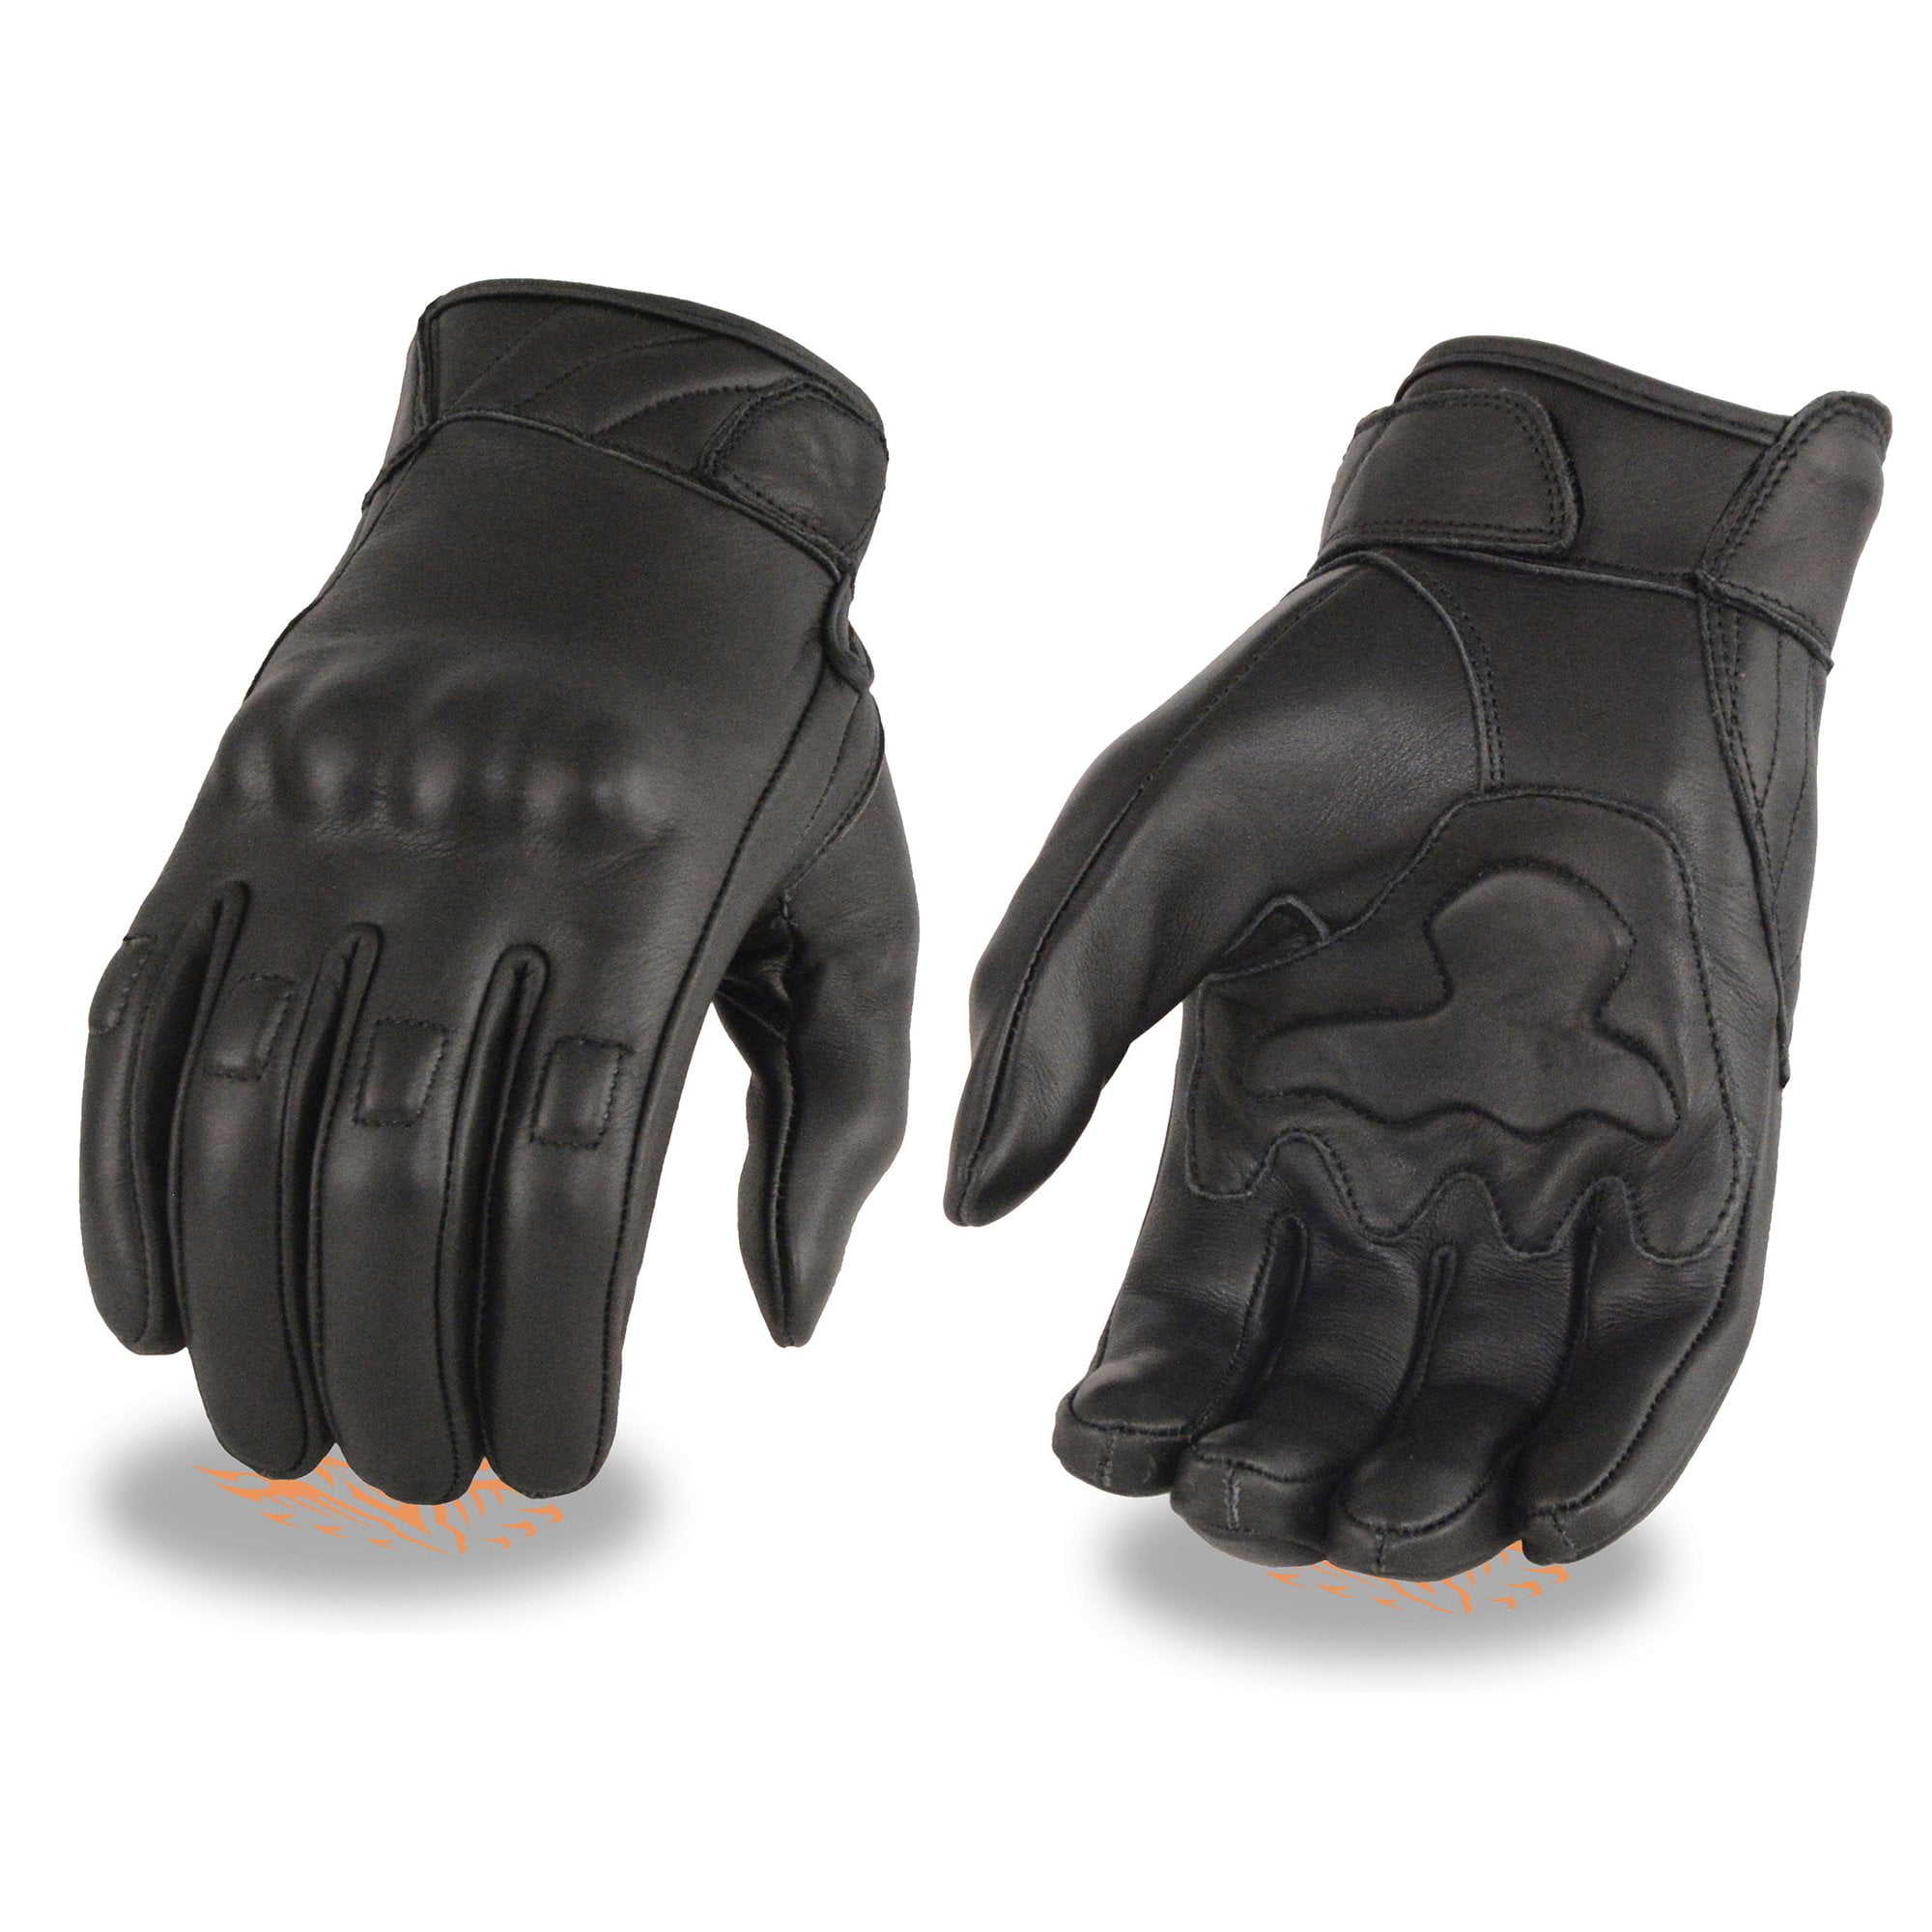 X-Large Xelement XG298 Men's Black 'Knuckle Protect' Leather Protective Racing Gloves 